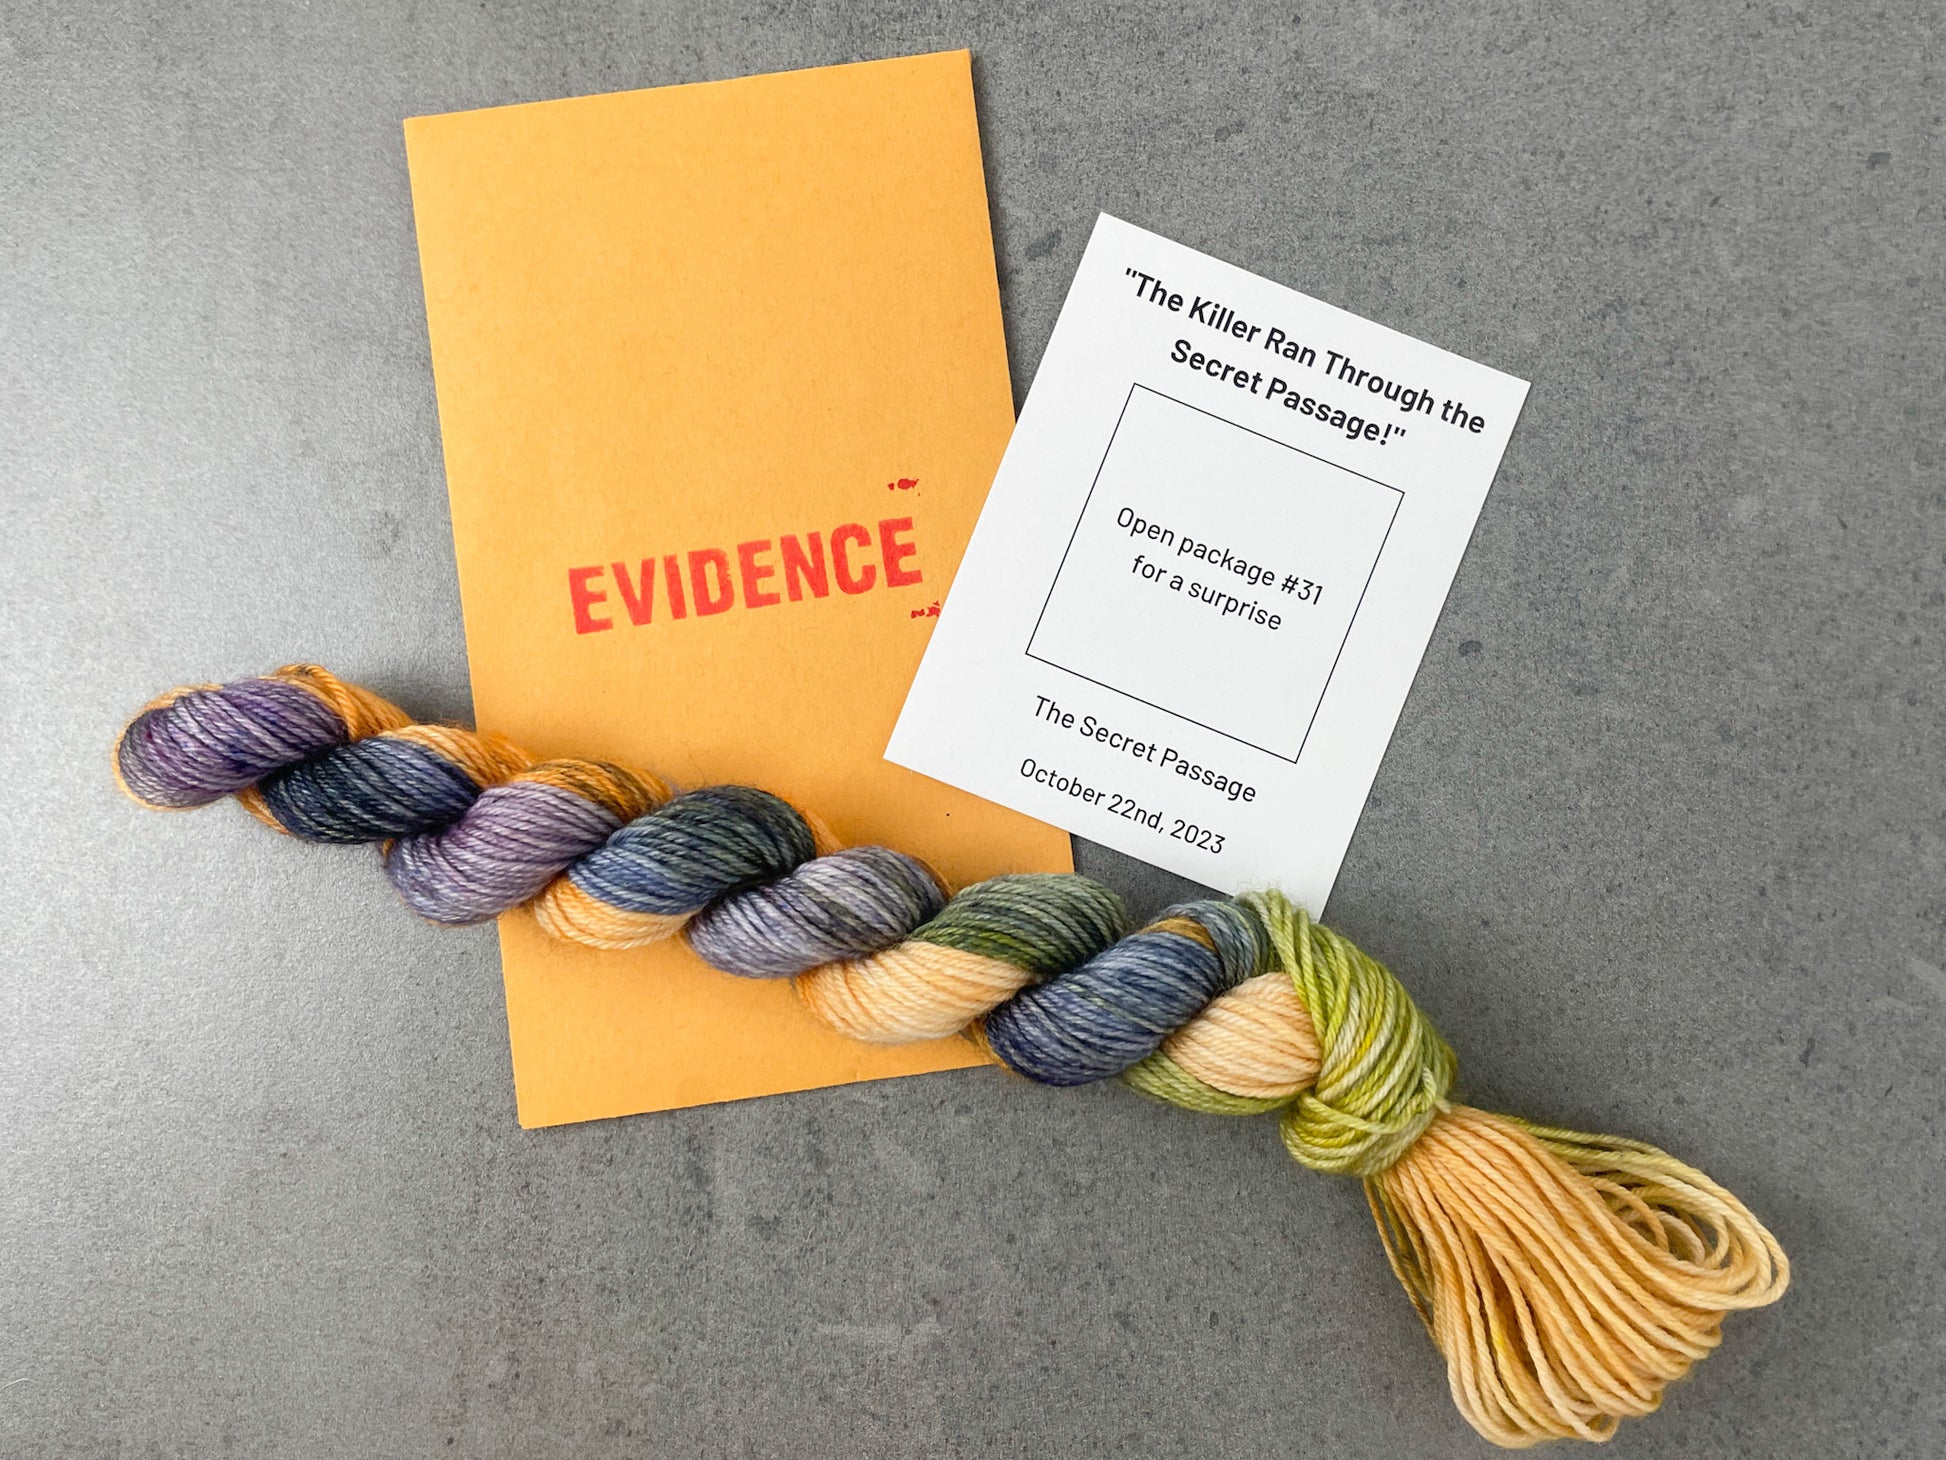 A variegated skein of purple, blue, green, and orange yarn  on top of an envelope stamped with "Evidence" and a white card with colorway information on it.